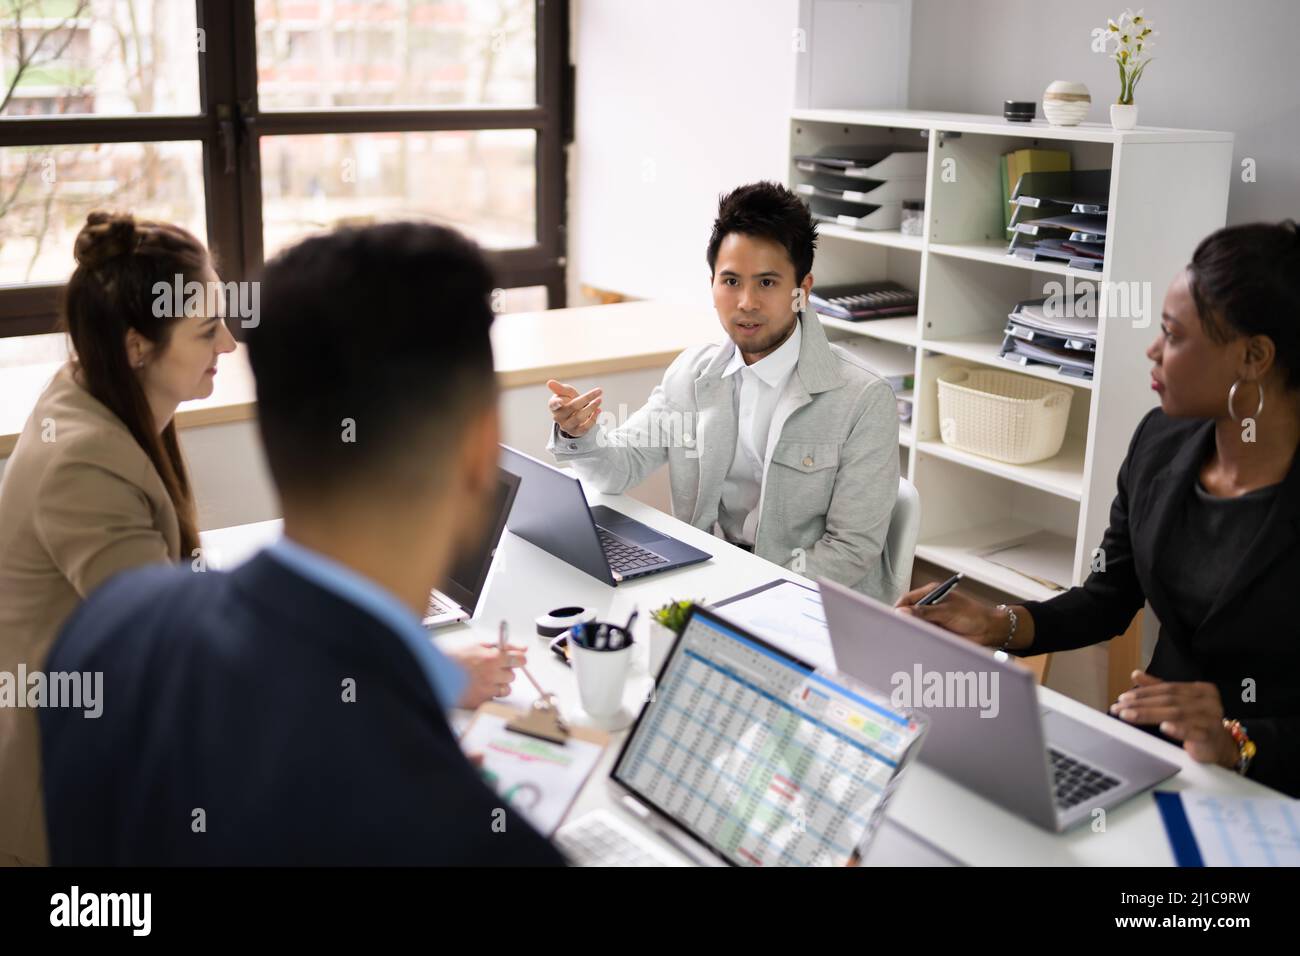 Diverse Business People Group At Workplace. Staff Meeting Stock Photo